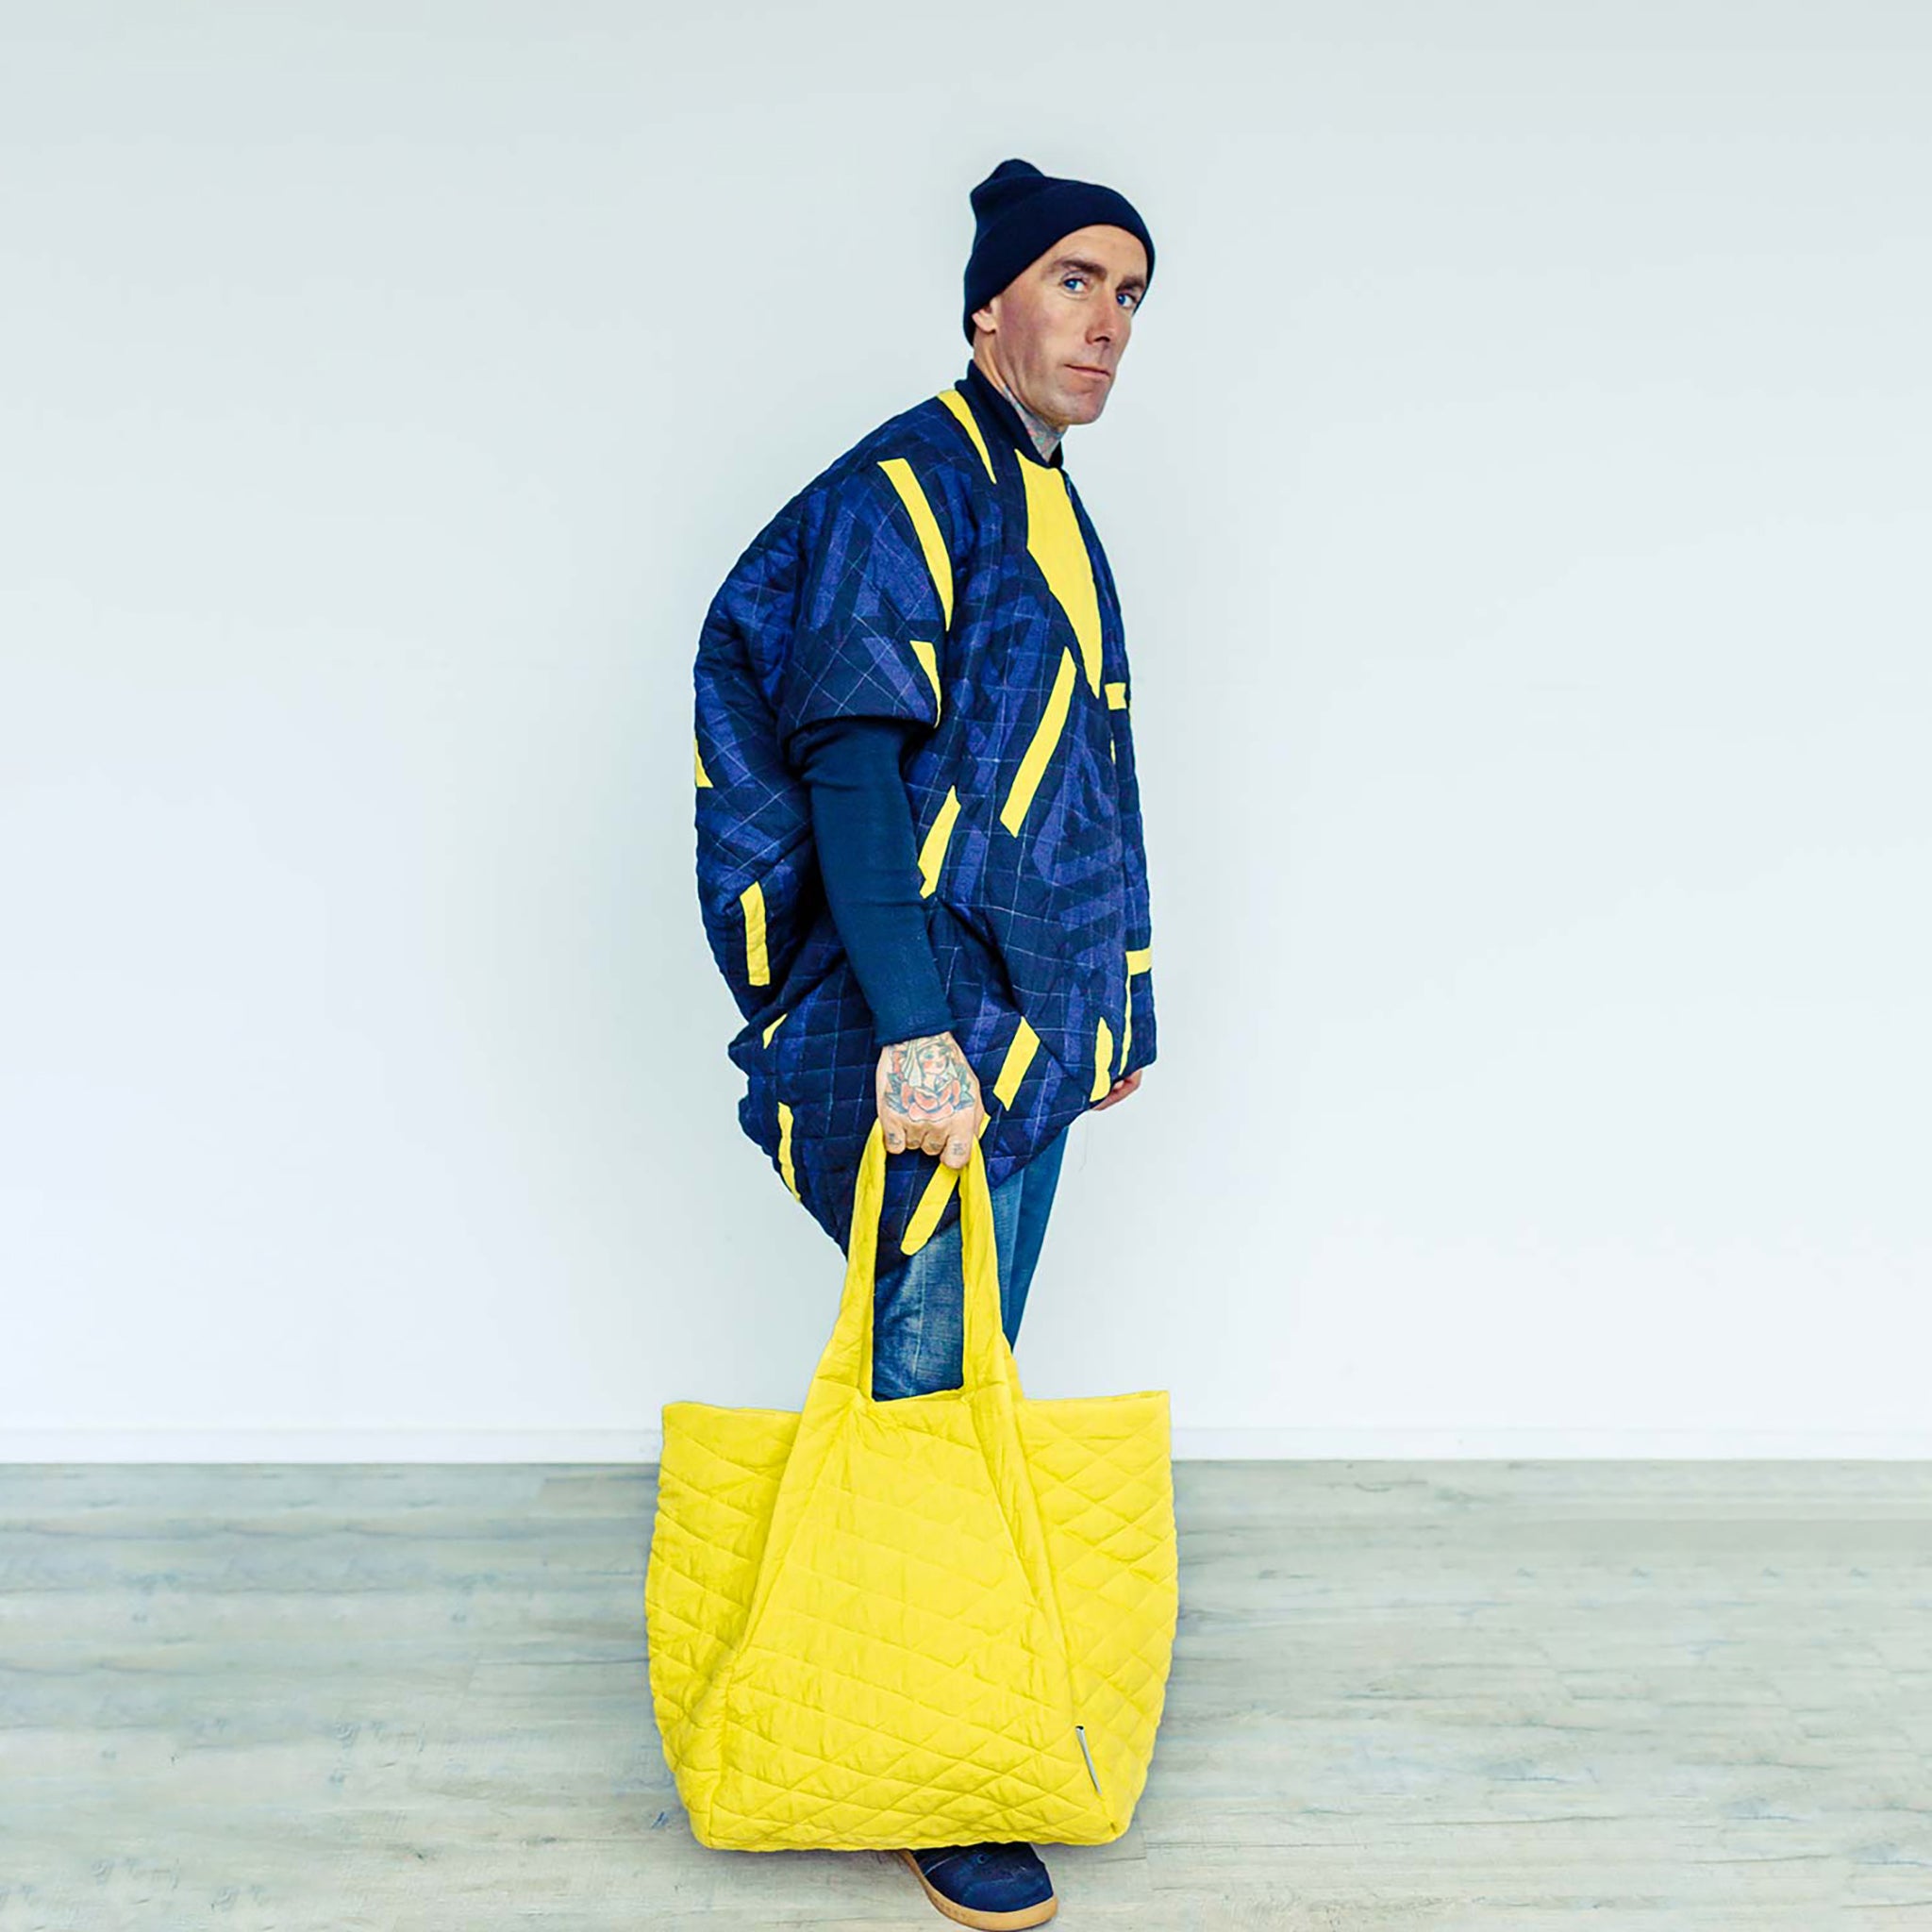 Man wearing The Costume Room Linen Patchwork Cocoon Coat with sunshine yellow Linen Quilted Bag